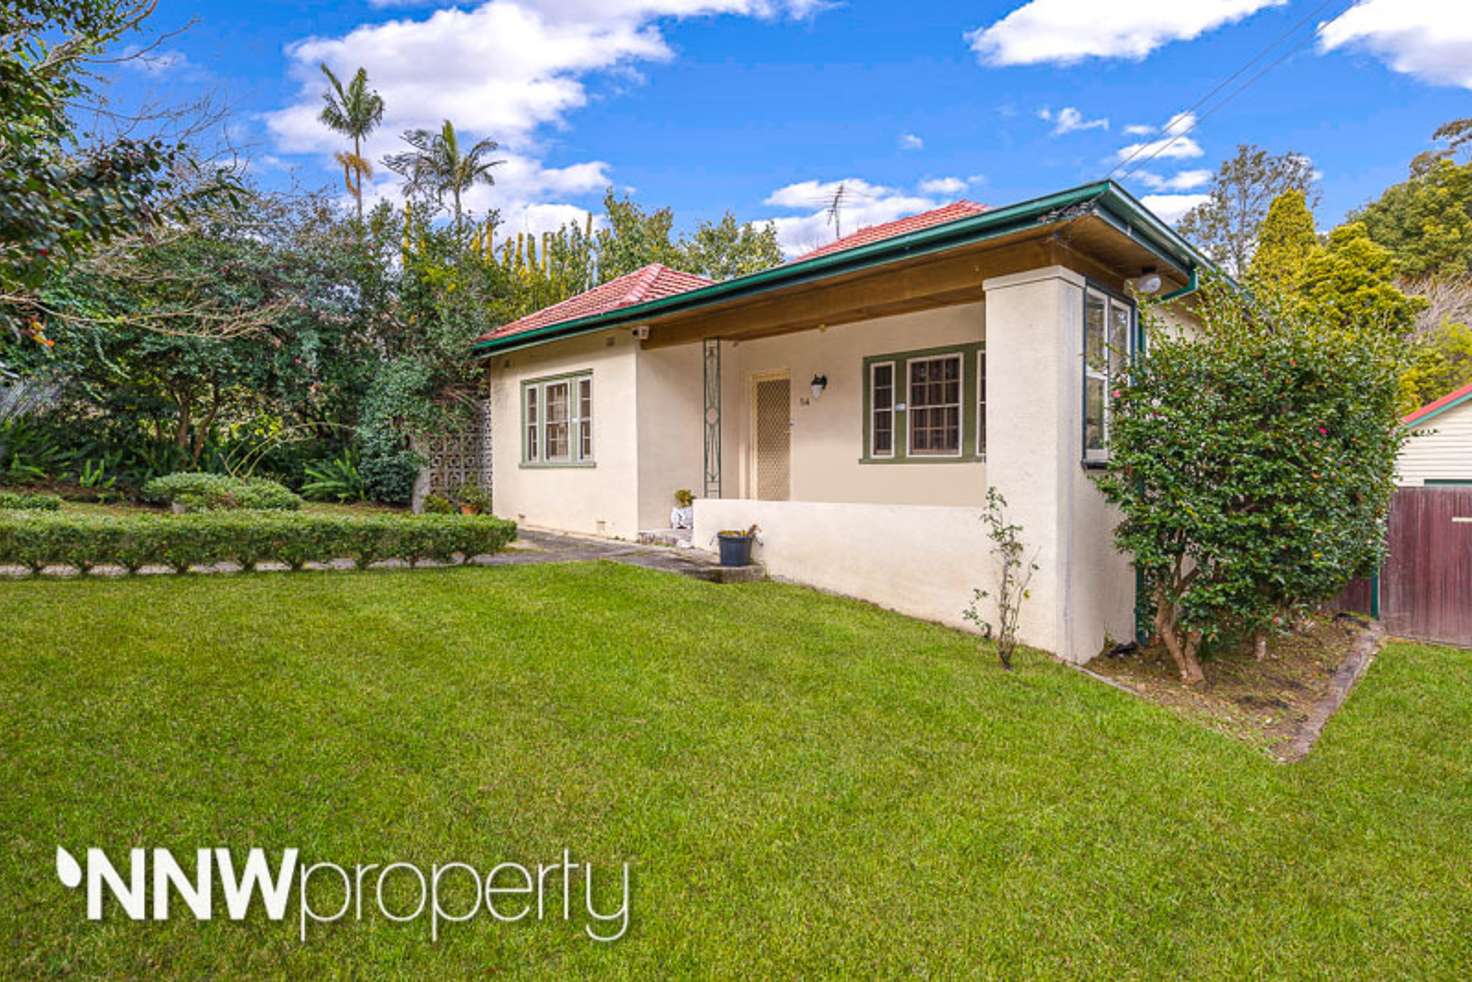 Main view of Homely house listing, 54 Burdett Street, Hornsby NSW 2077